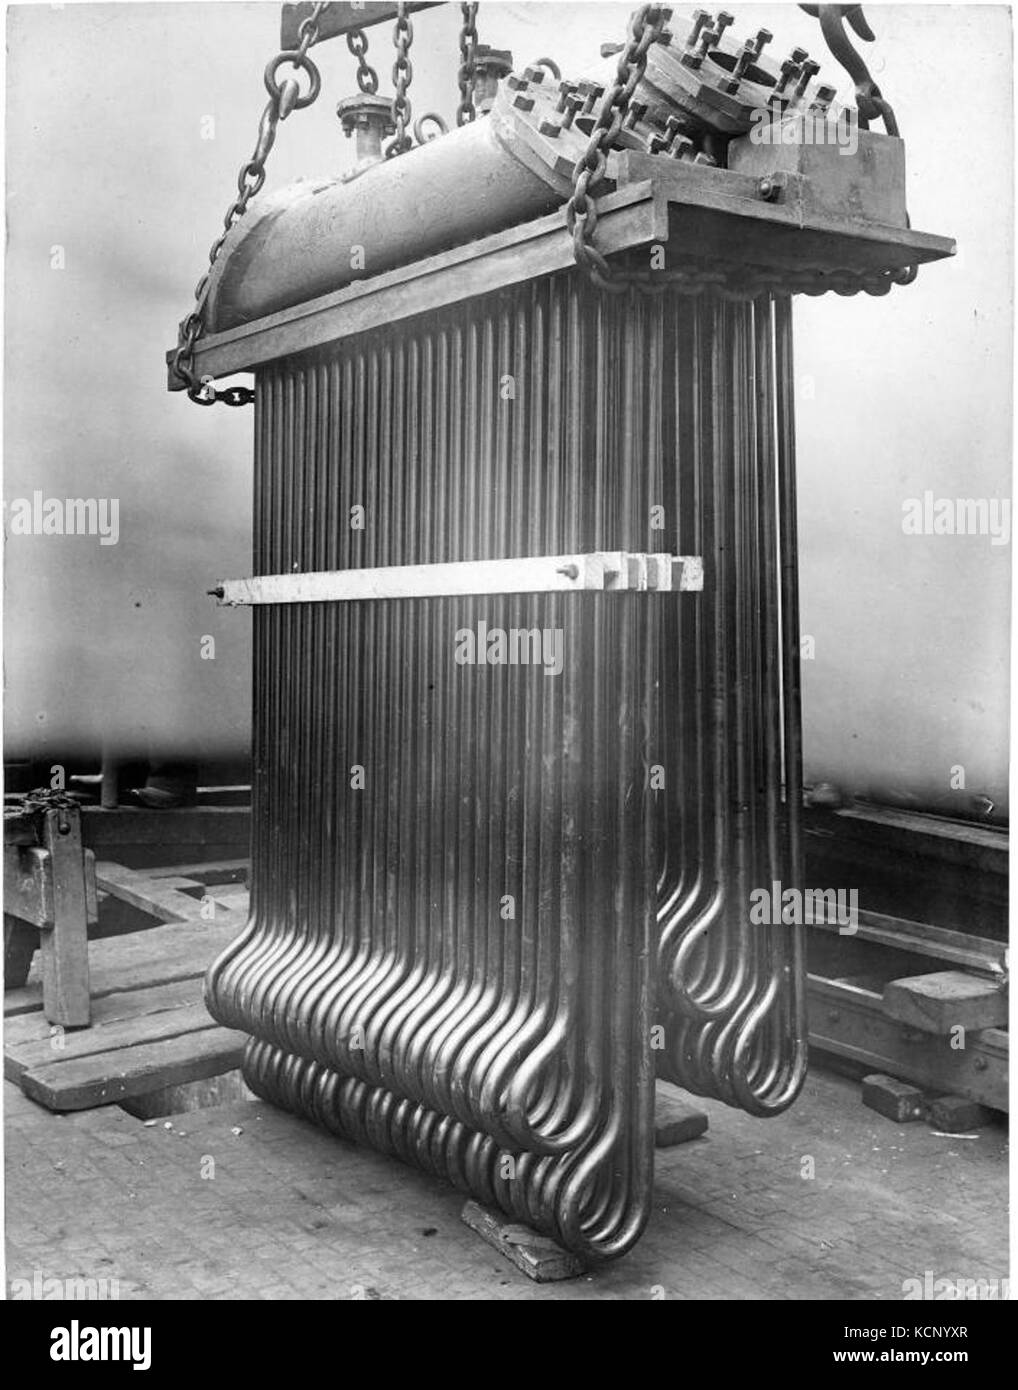 Superheater for steam фото 11